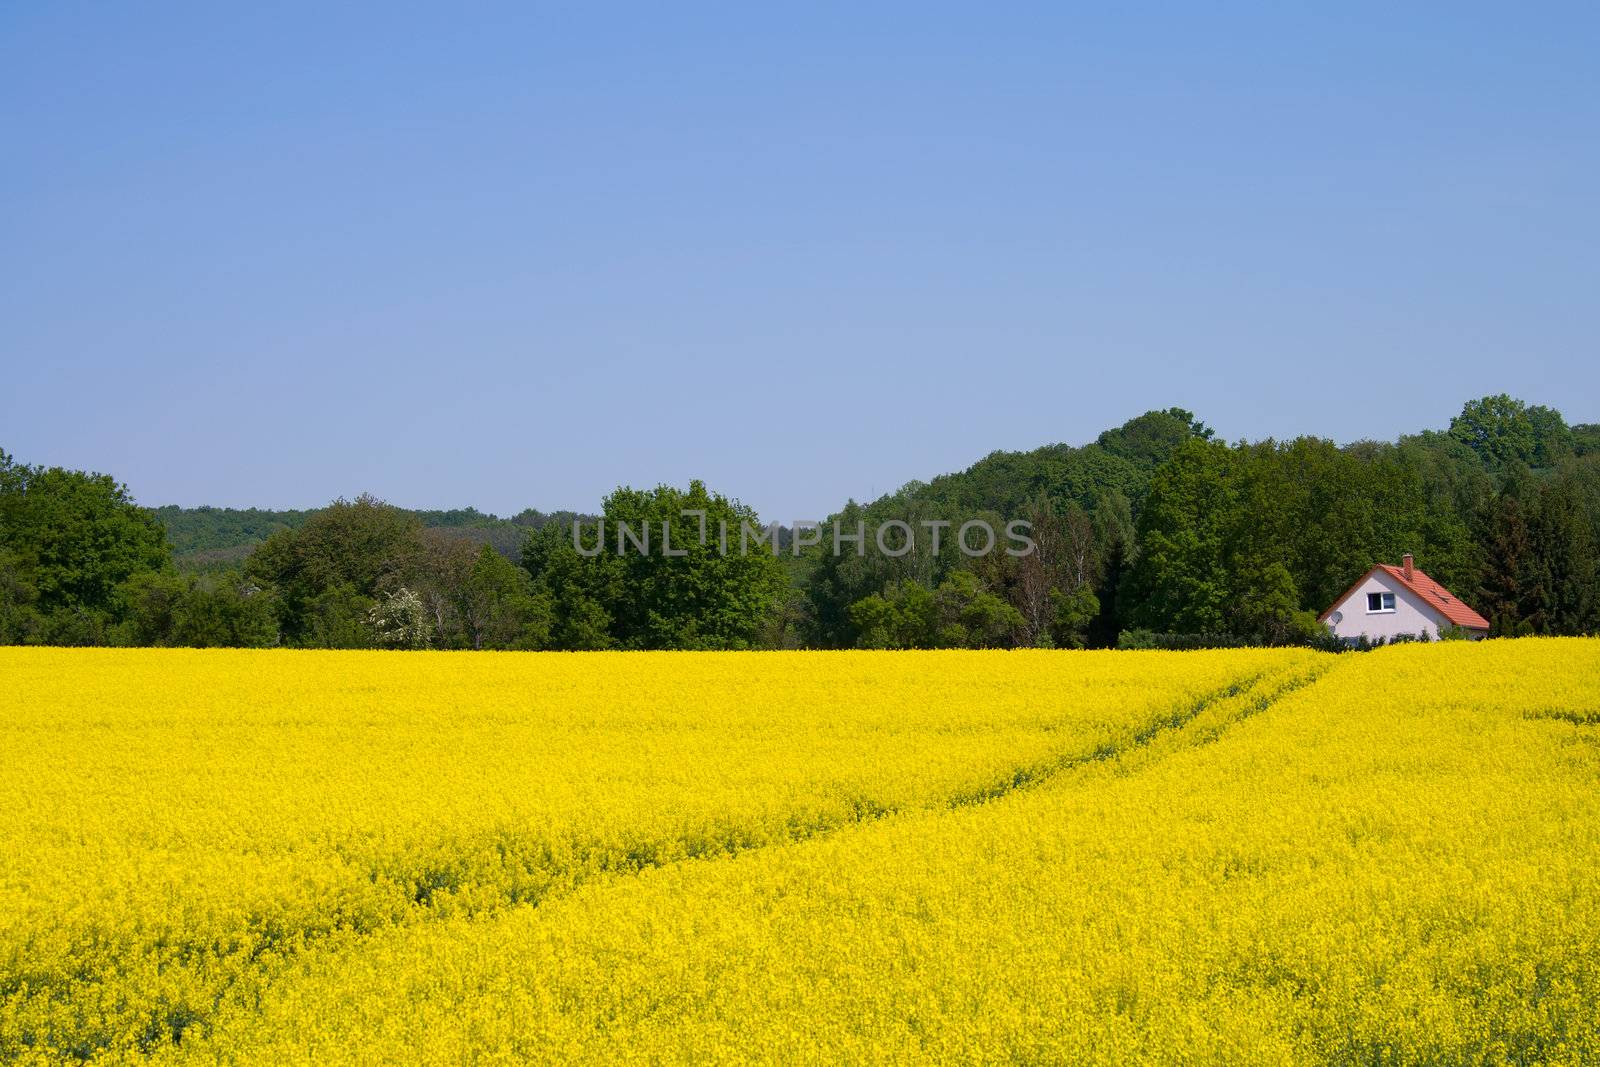 The house is buried in a field of rapeseed in Saxony-Anhalt/Germany.